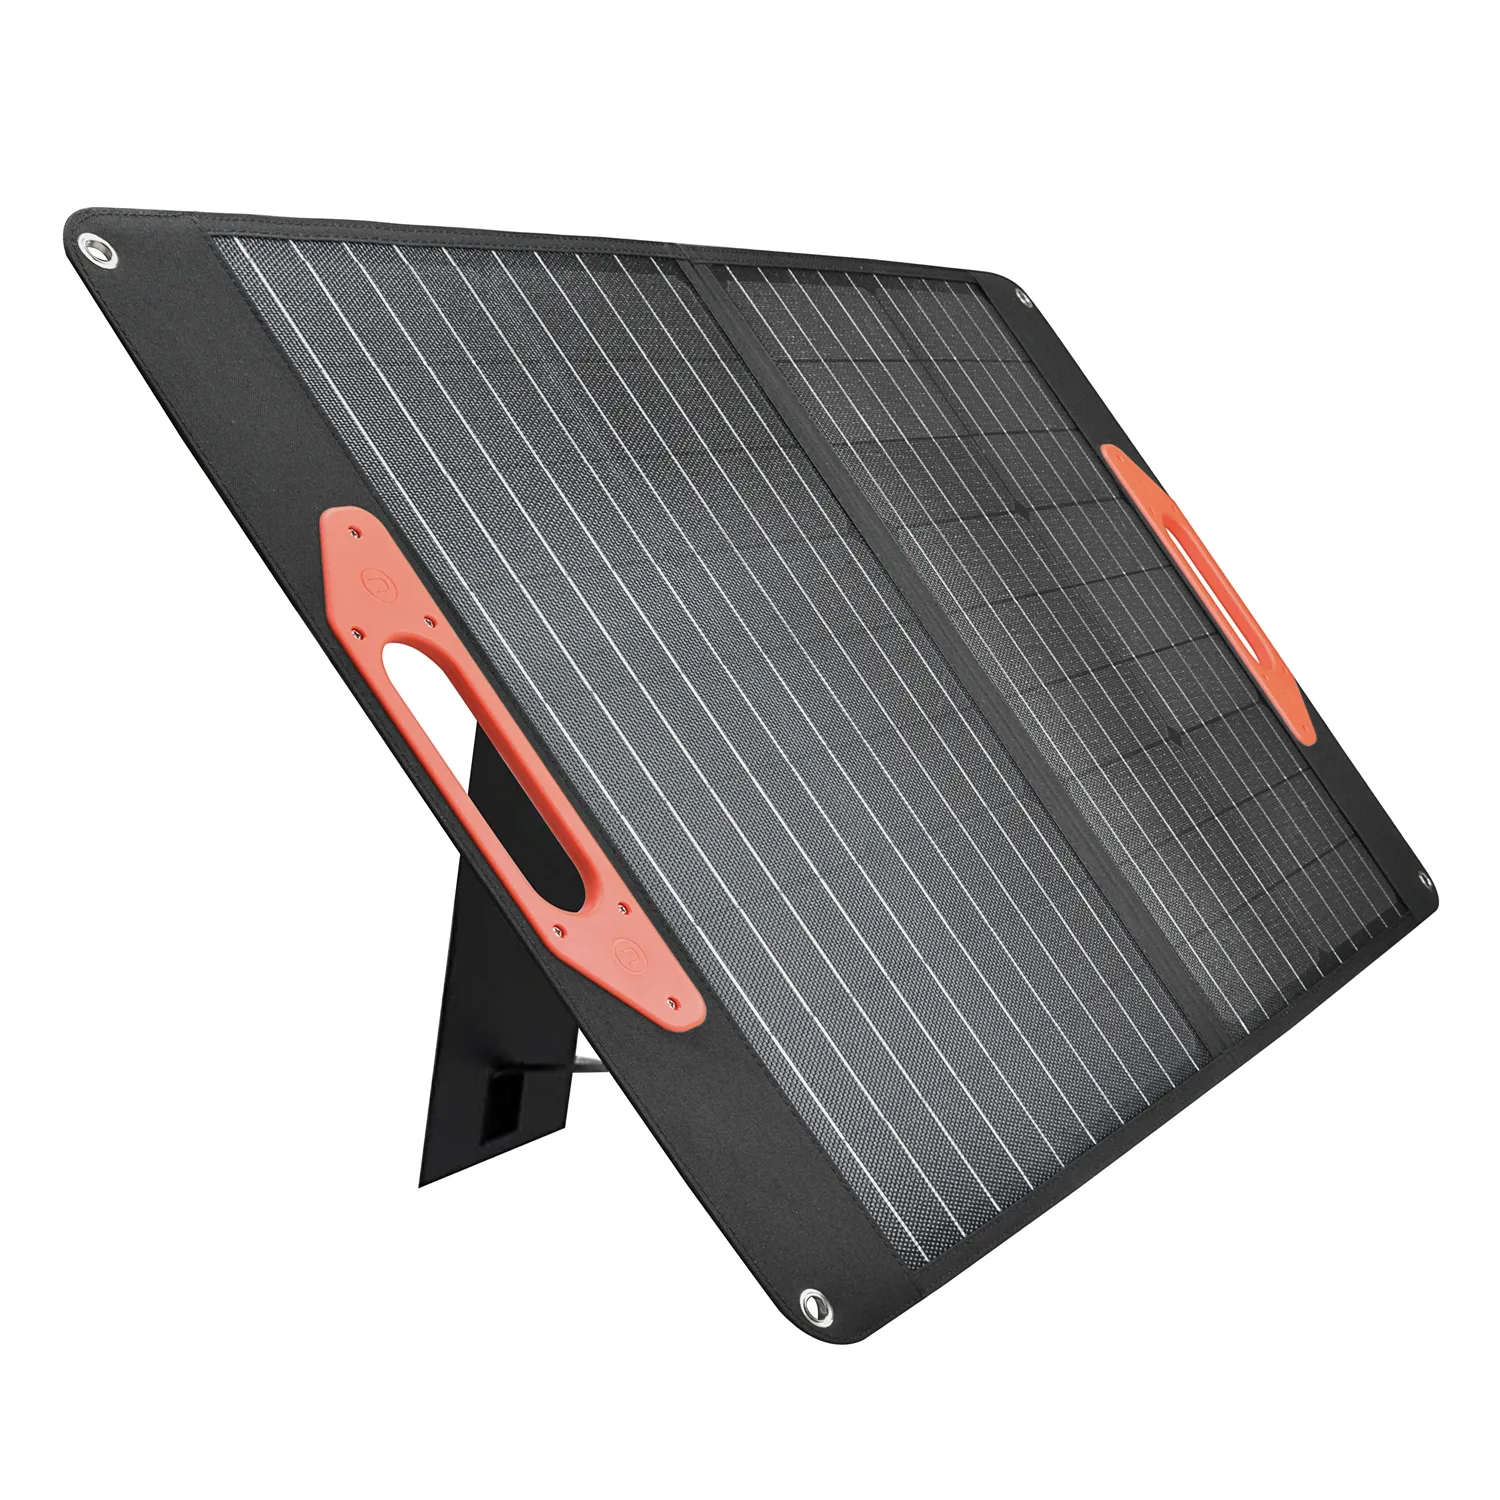 Waterproof ETFE mono cell 60W Portable Foldable Solar panel Charger for Camping, home solar system with USB/Type-C/DC output